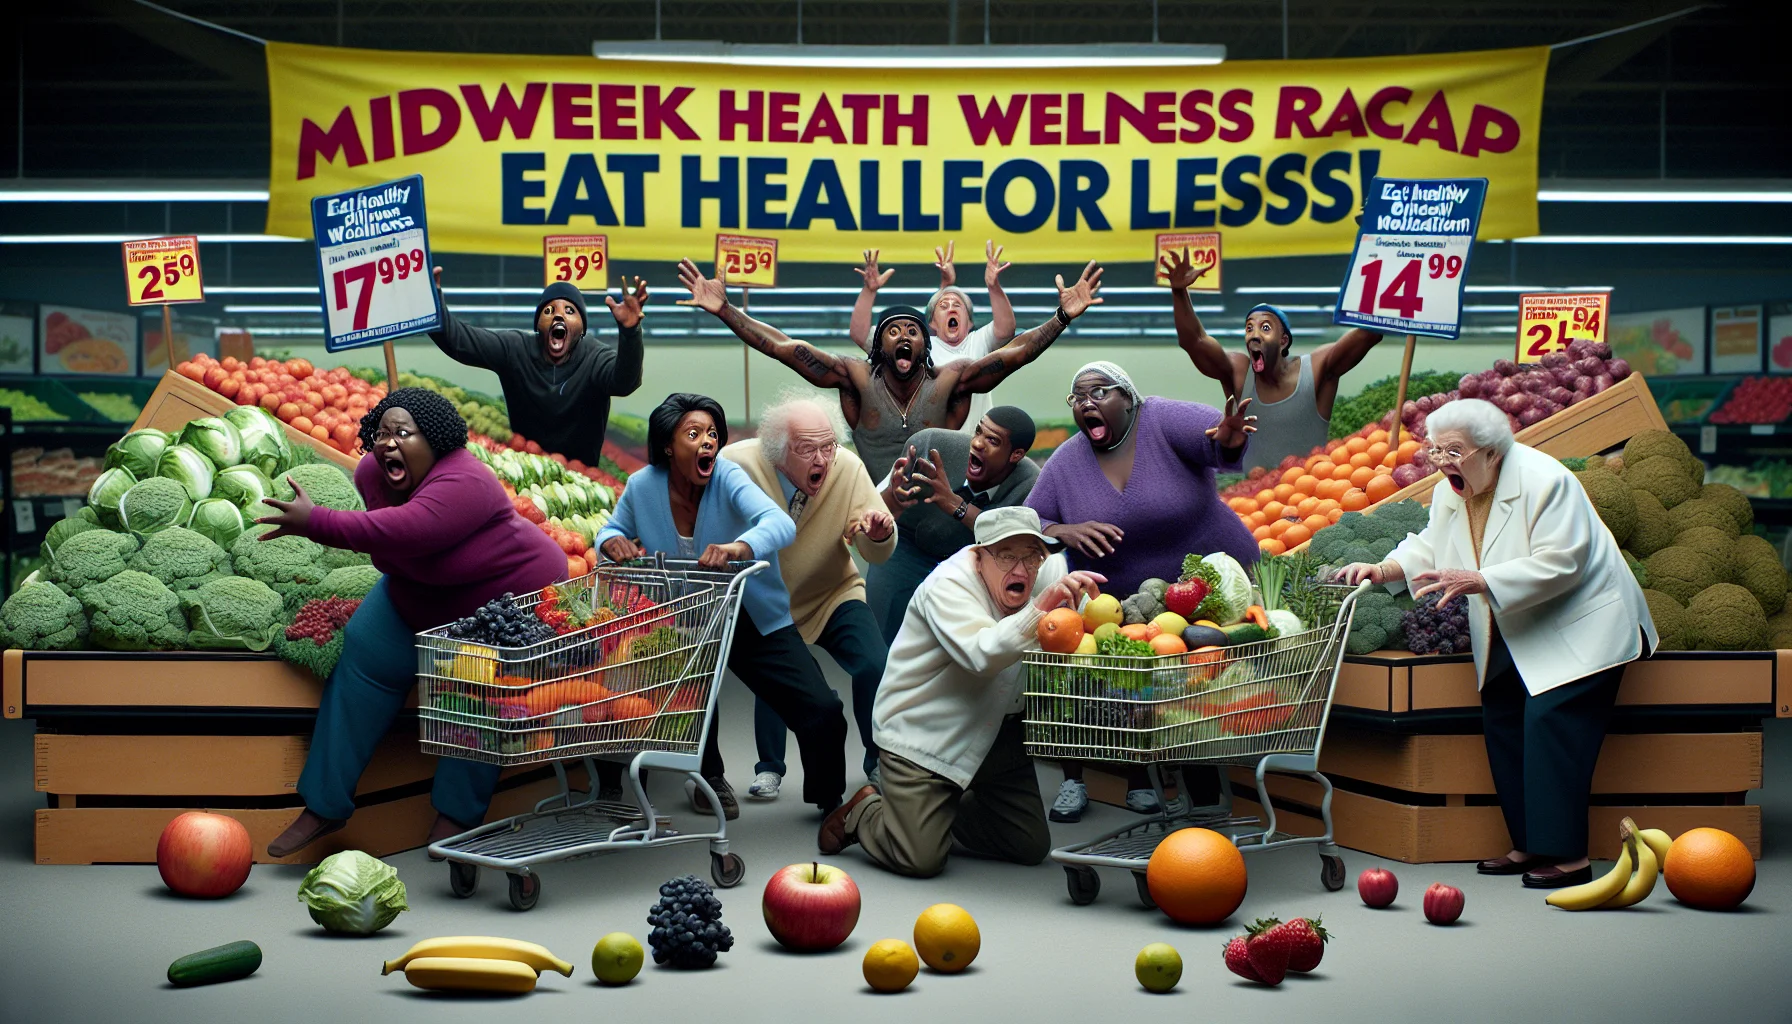 Create a humorous and realistic image centered around a 'Midweek Health and Wellness Recap'. The scene should depict an exaggerated supermarket sale, where fruit and vegetable prices have plummeted ridiculously low. A diverse array of shoppers, including a Black man, a Hispanic woman, a Caucasian elderly couple, and a South Asian teenager, excitedly toss inexpensive fresh produce into their carts. The backdrop features a large banner that reads 'Eat Healthy For Less!'. Everywhere, there is a sense of surprise, joy, and a newfound passion for affordable nutrition.